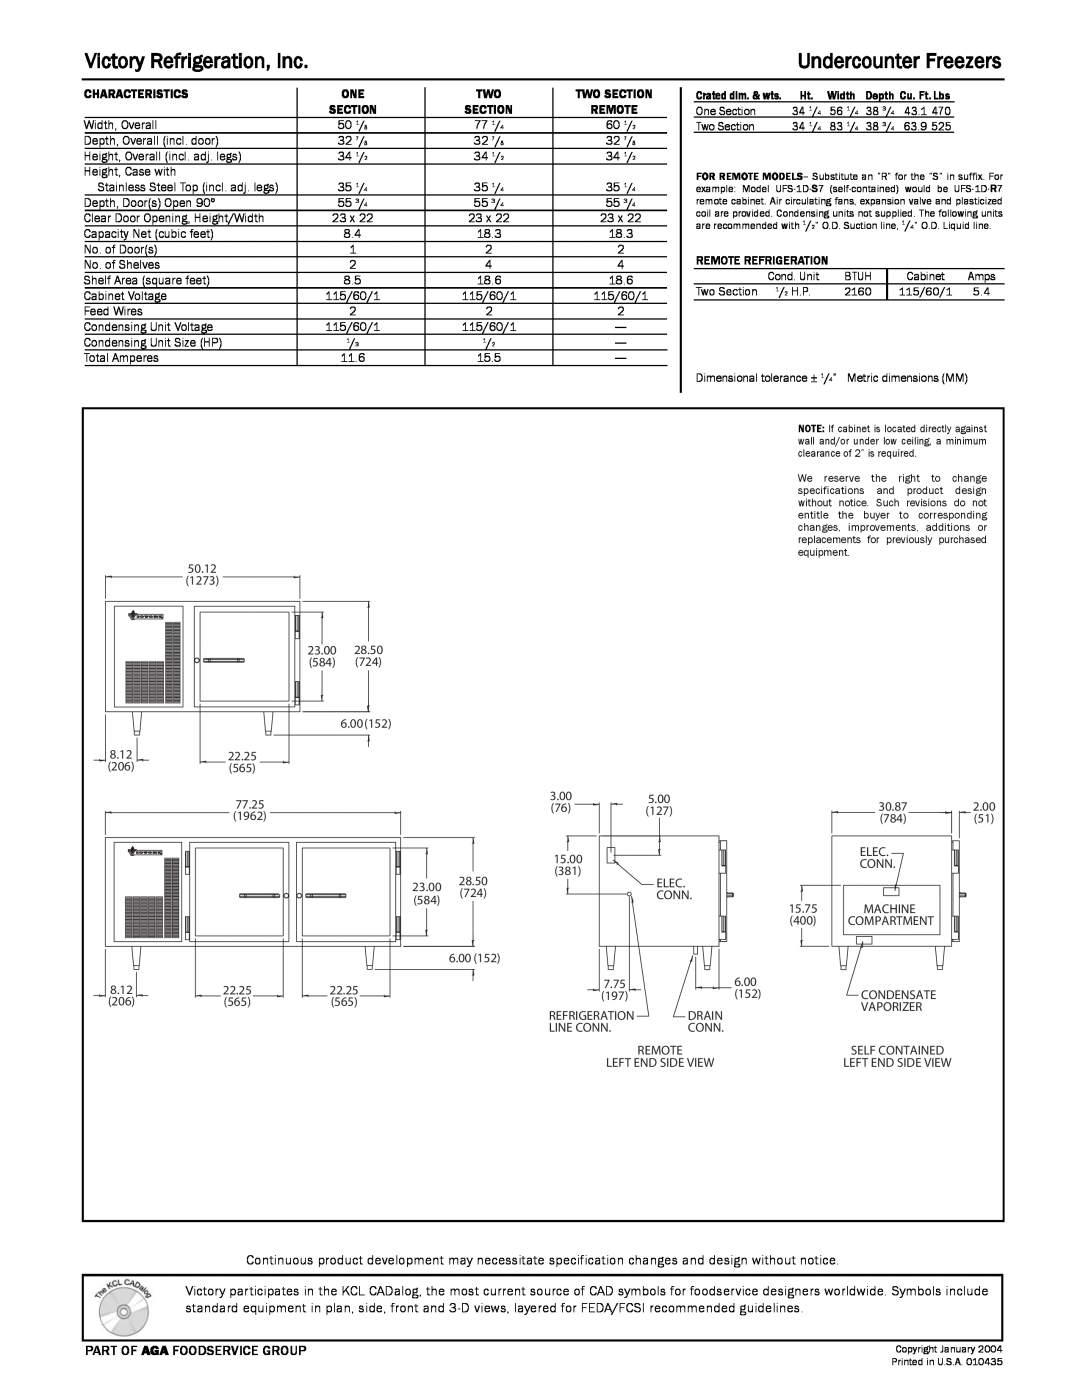 Victory Refrigeration UFS-1-S7, UFS-2-S7 specifications Victory Refrigeration, Inc, Undercounter Freezers 